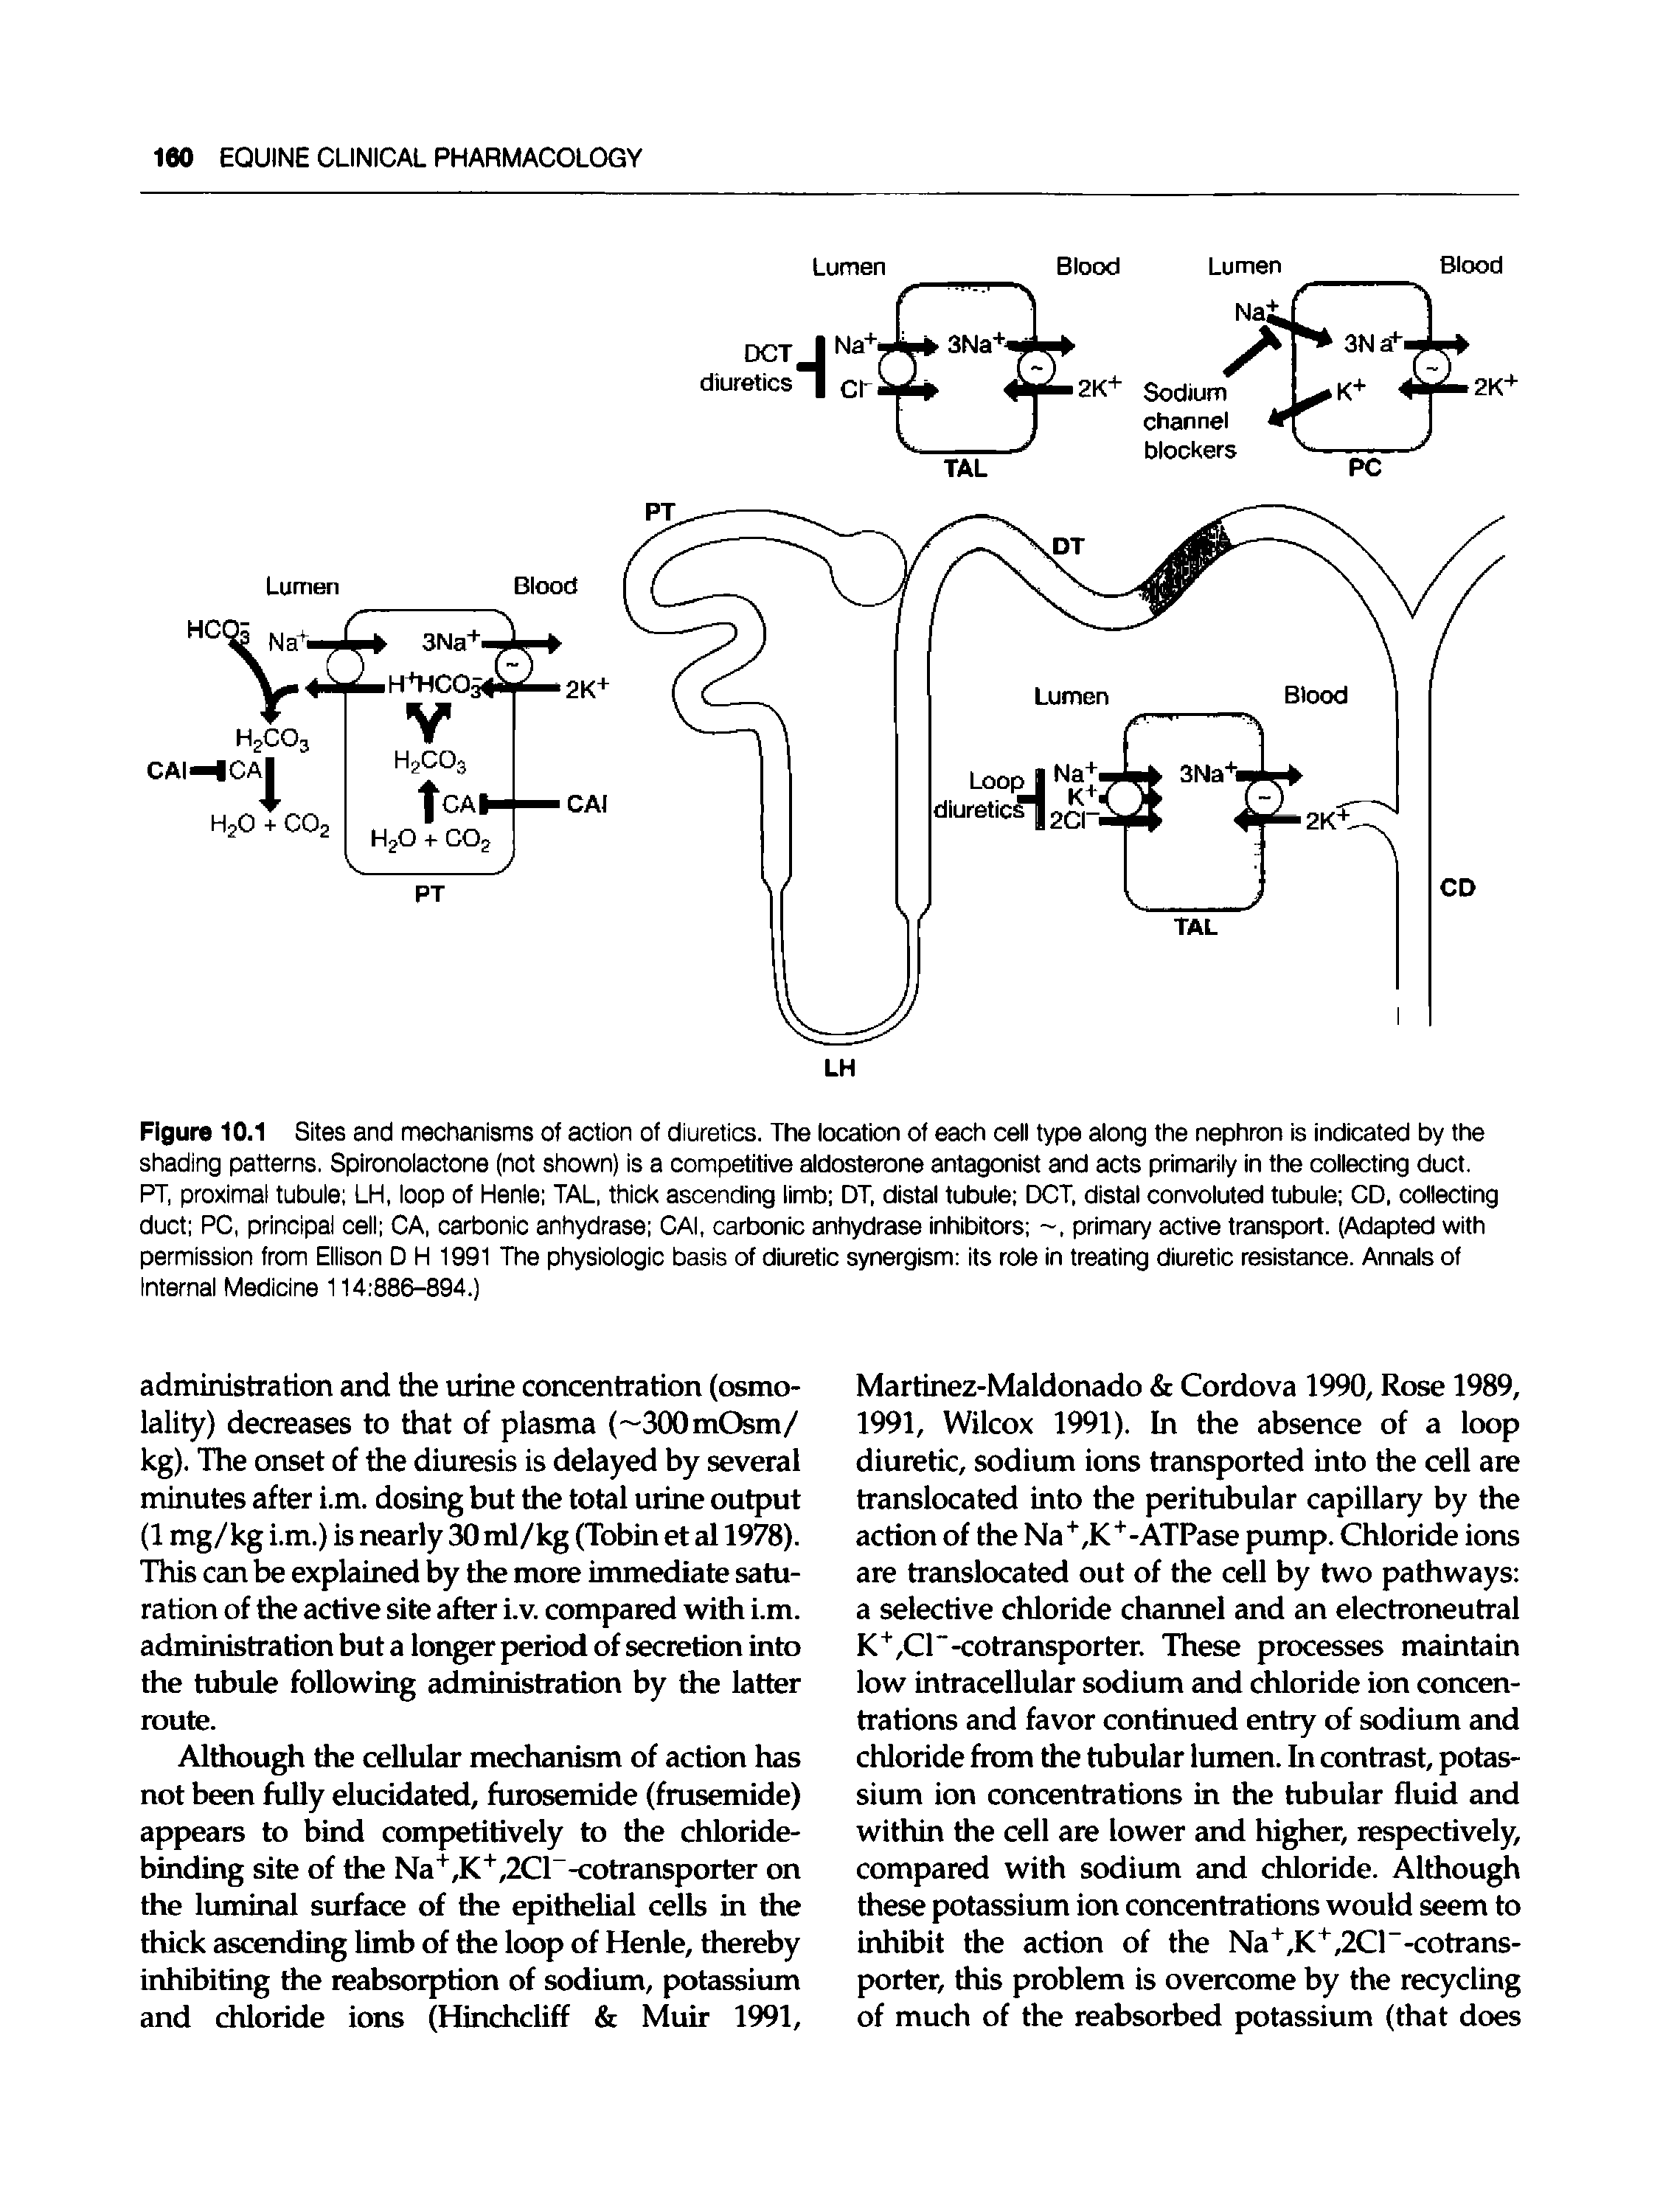 Figure 10.1 Sites and mechanisms of action of diuretics. The location of each cell type along the nephron is indicated by the shading patterns. Spironoiactone (not shown) is a competitive aldosterone antagonist and acts primarily in the collecting duct. PT, proximal tubule LH, loop of Henie TAL, thick ascending limb DT, distal tubule DCT, distal convoluted tubule CD, collecting duct PC, principal cell CA, carbonic anhydrase CAI, carbonic anhydrase inhibitors , primary active transport. (Adapted with permission from Ellison D H 1991 The physiologic basis of diuretic synergism its role in treating diuretic resistance. Annals of Internal Medicine 114 886-894.)...